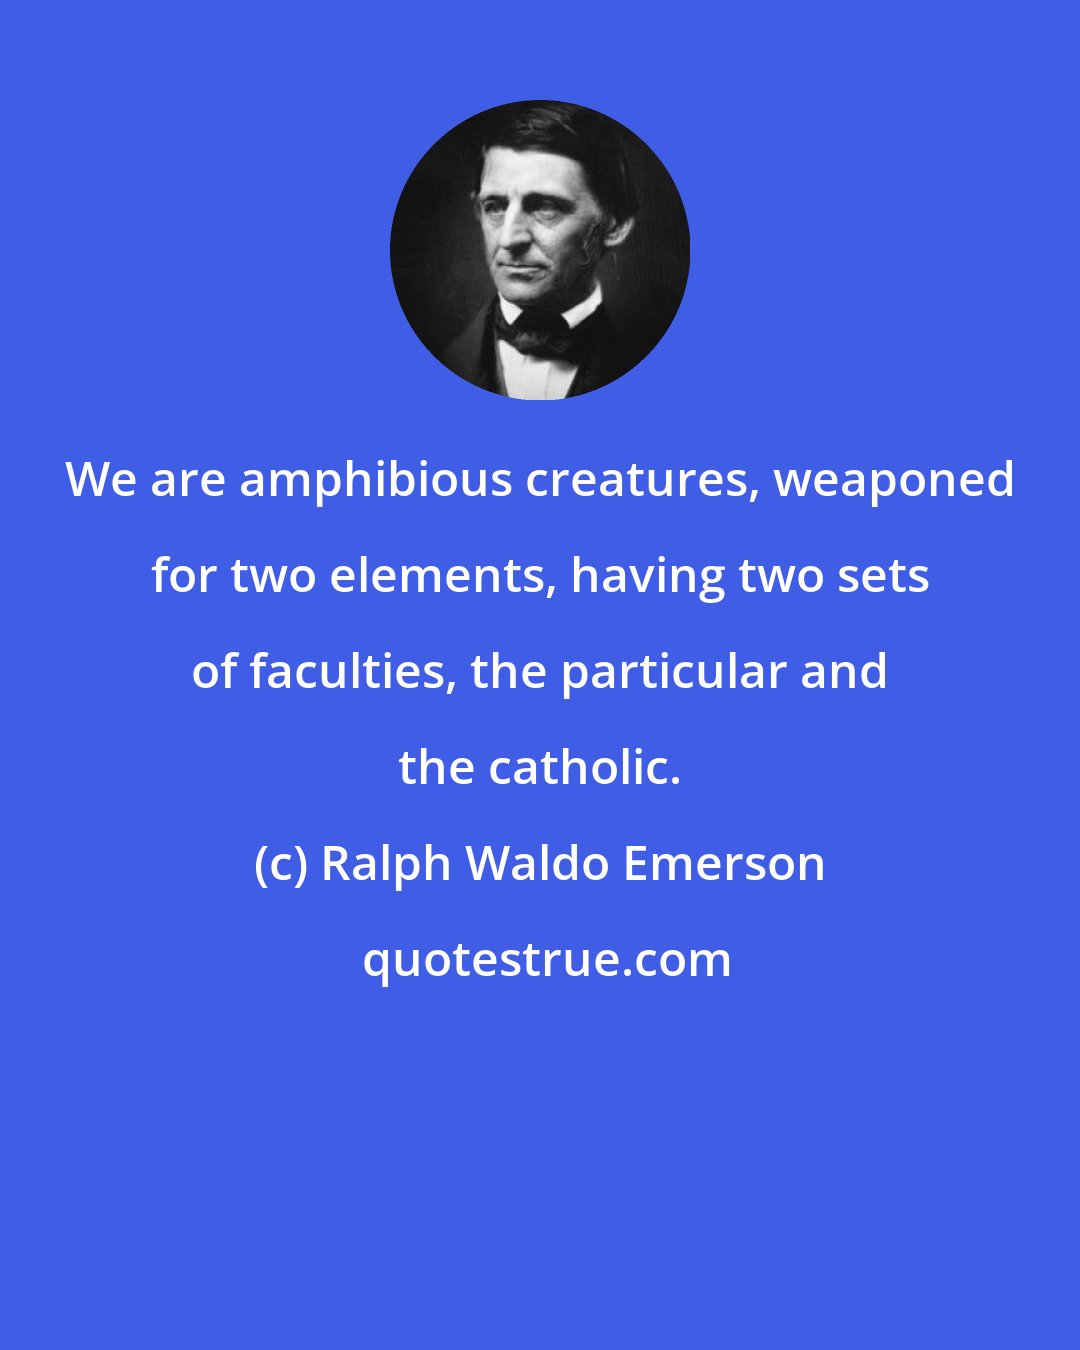 Ralph Waldo Emerson: We are amphibious creatures, weaponed for two elements, having two sets of faculties, the particular and the catholic.